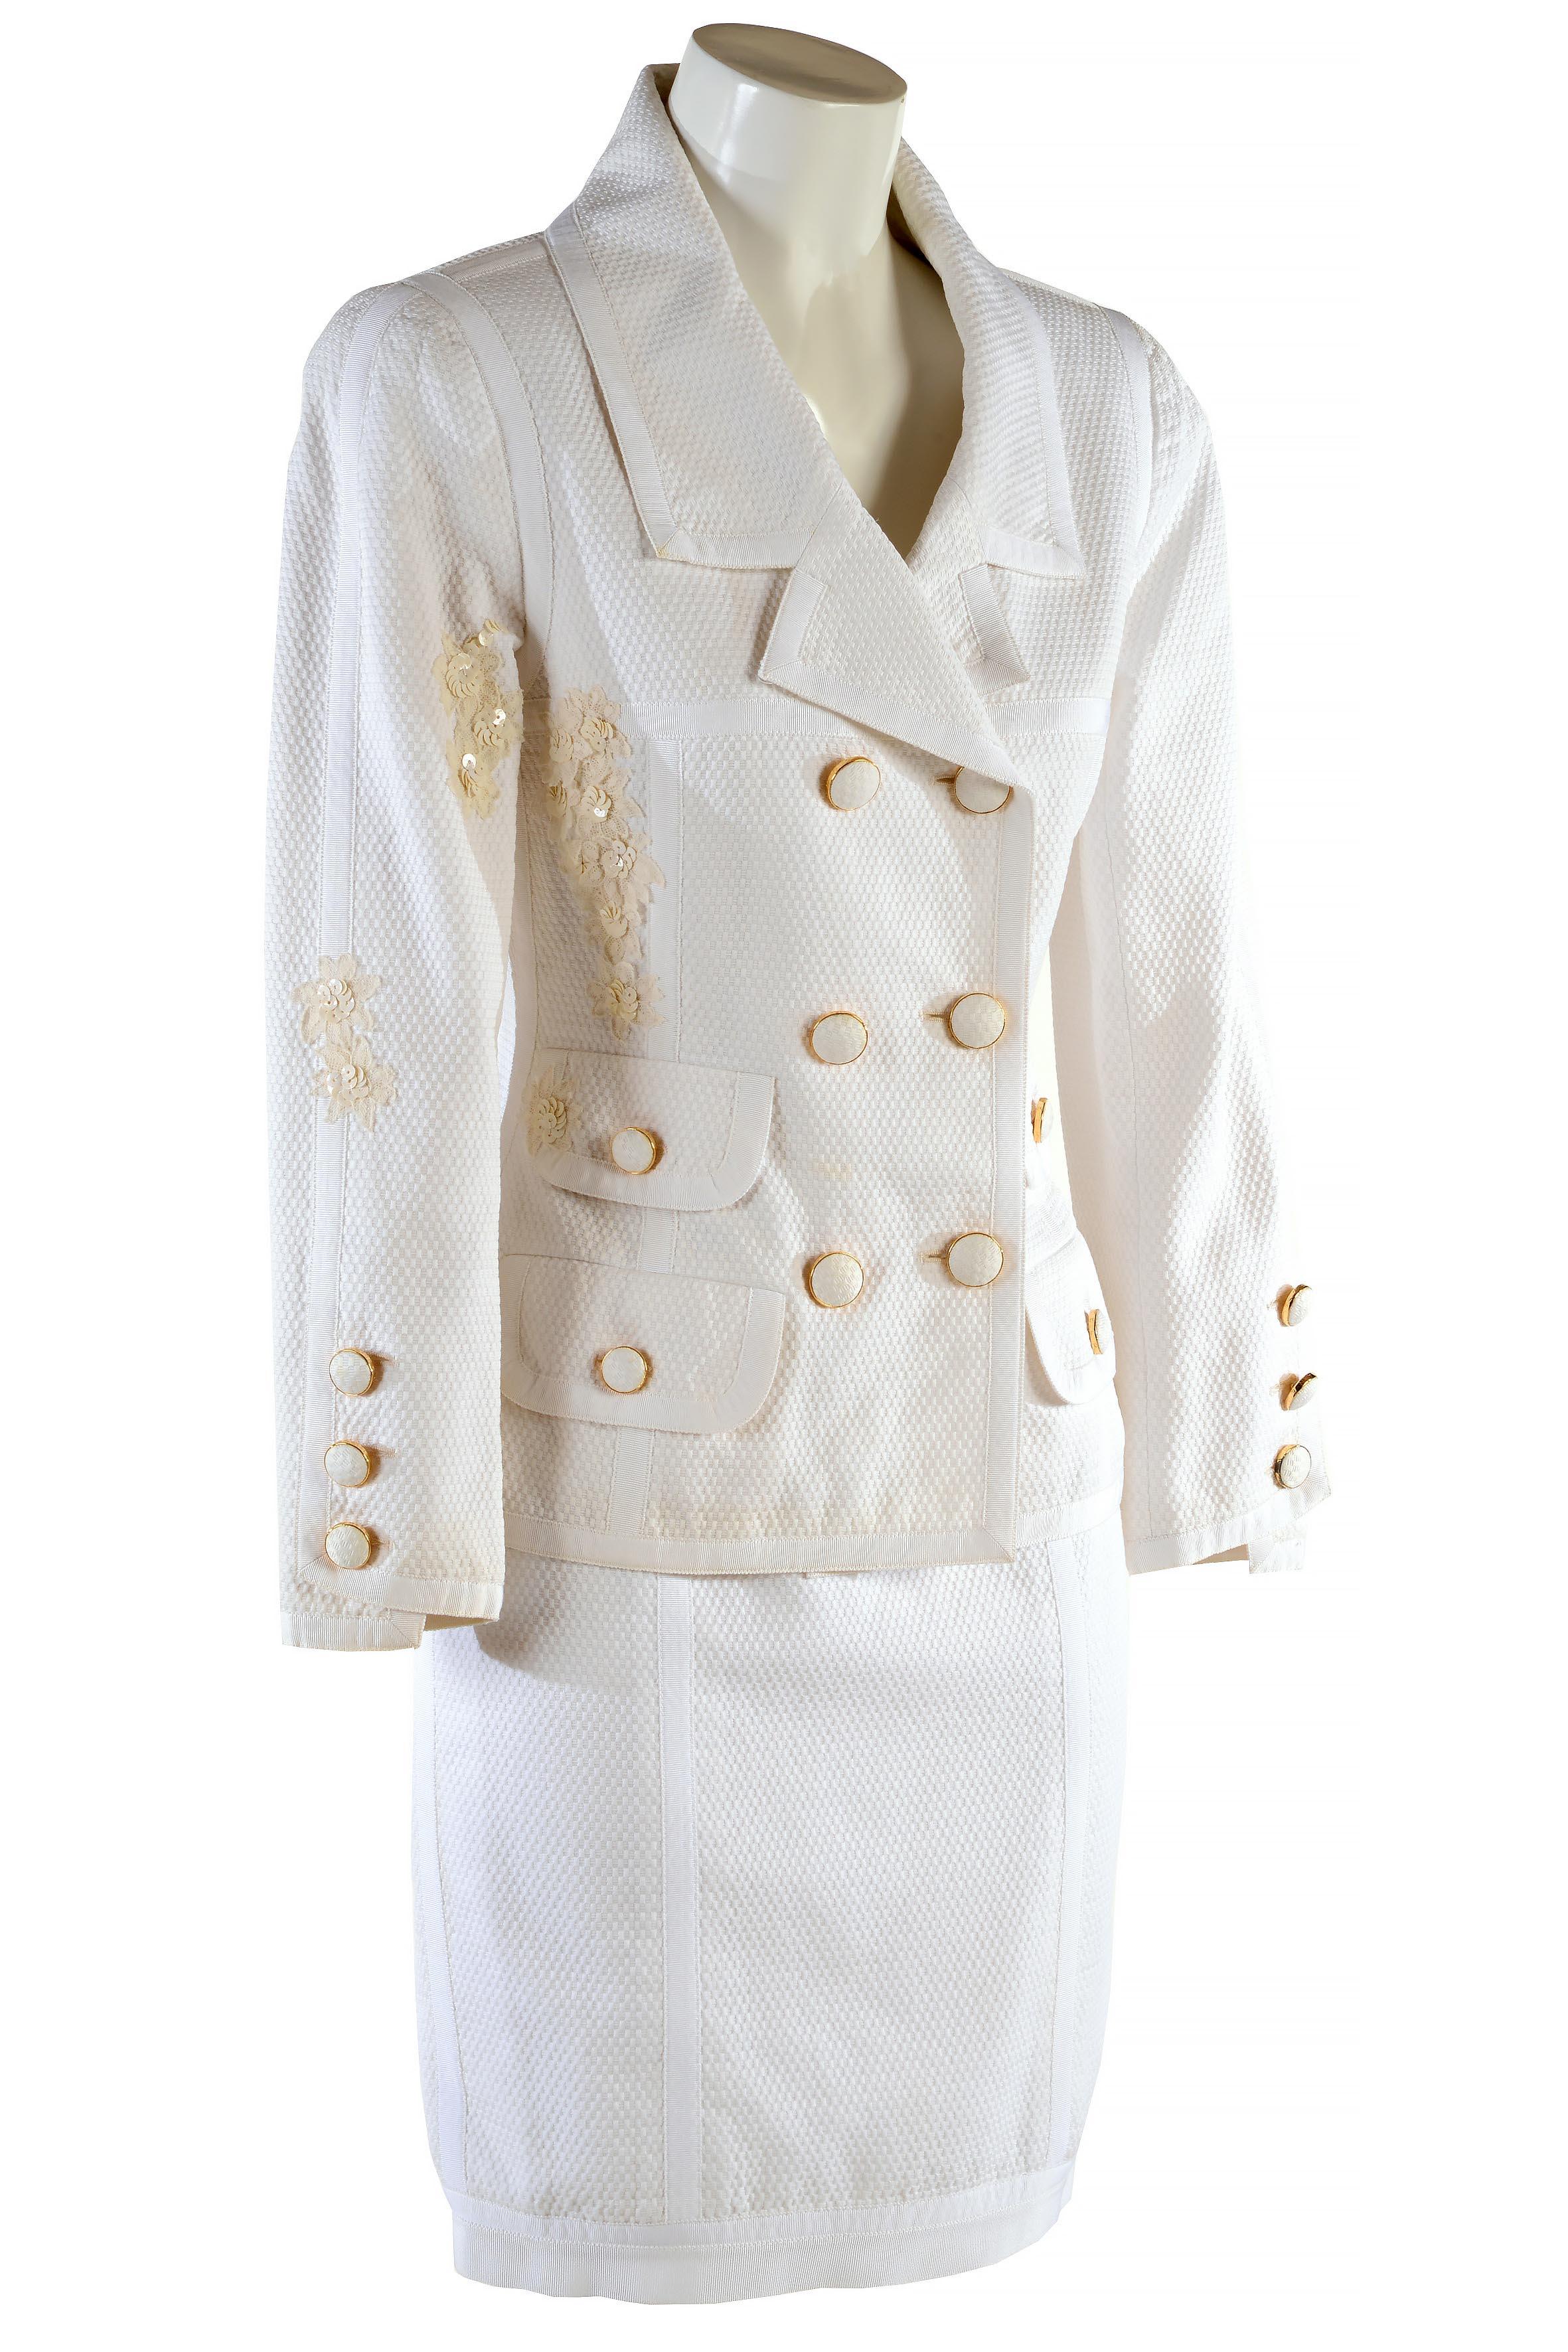 chanel womens suit